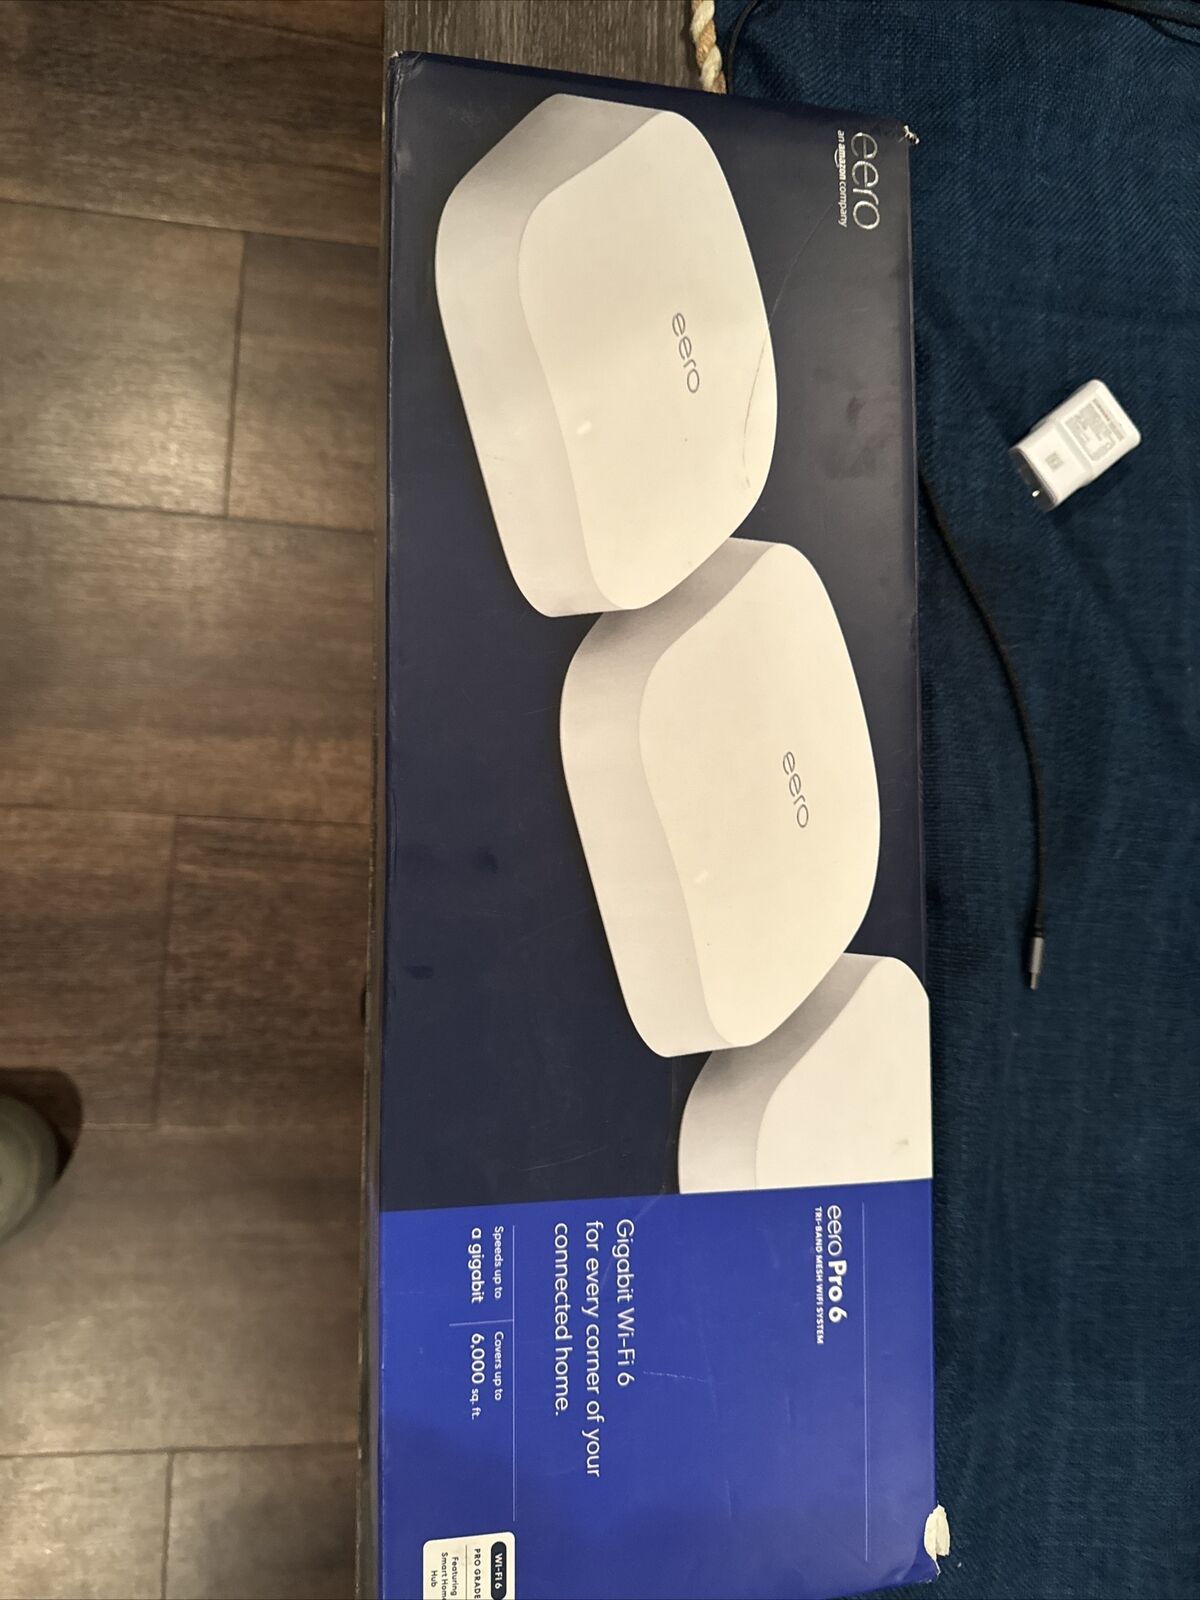 eero Pro 6 AX4200 Tri-Band Wi-Fi Mesh System - White (Pack of 3 Devices)